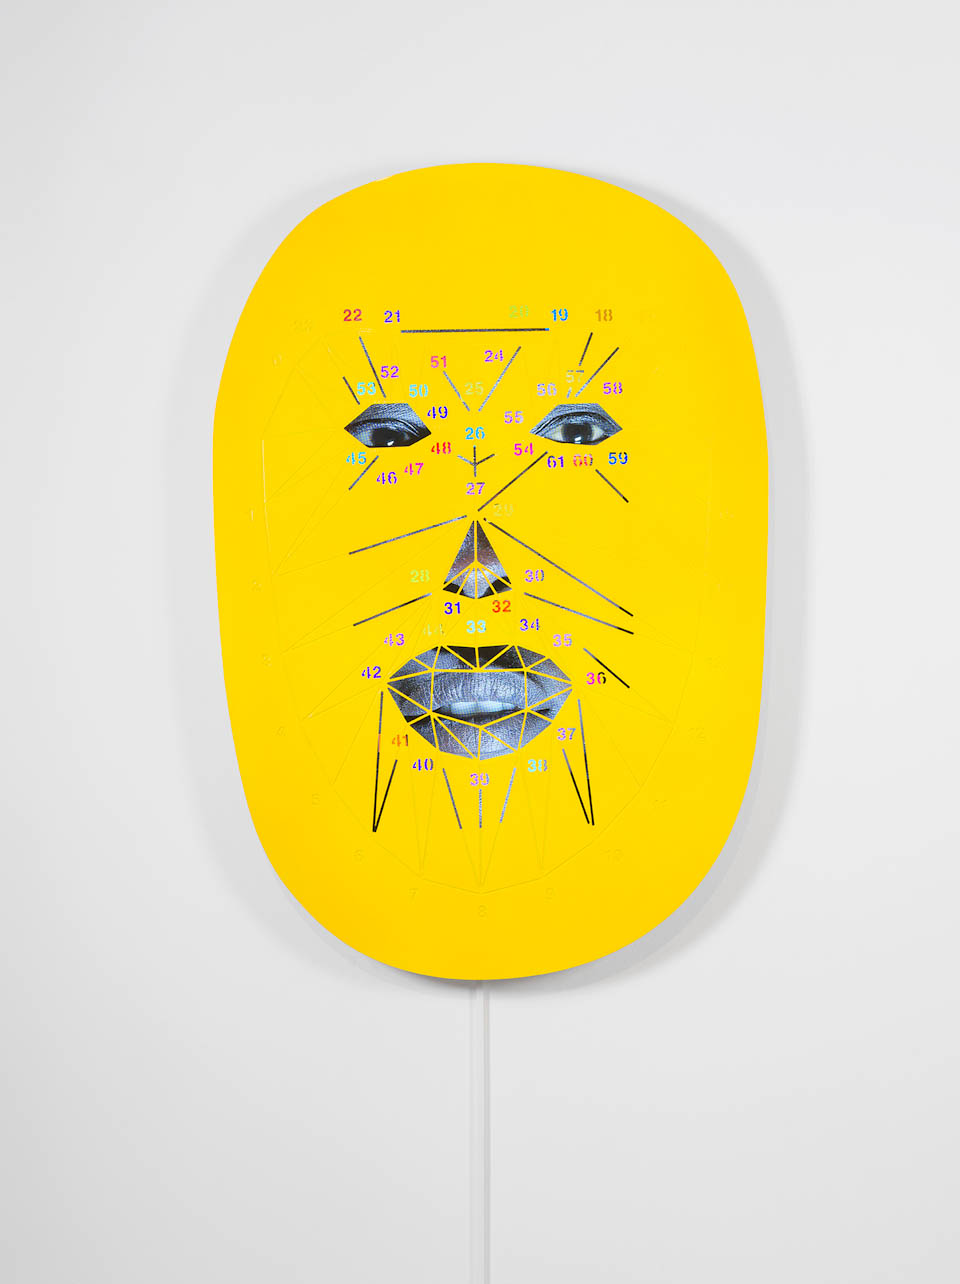 Tony_Oursler_2015_OUR_169_big.jpg